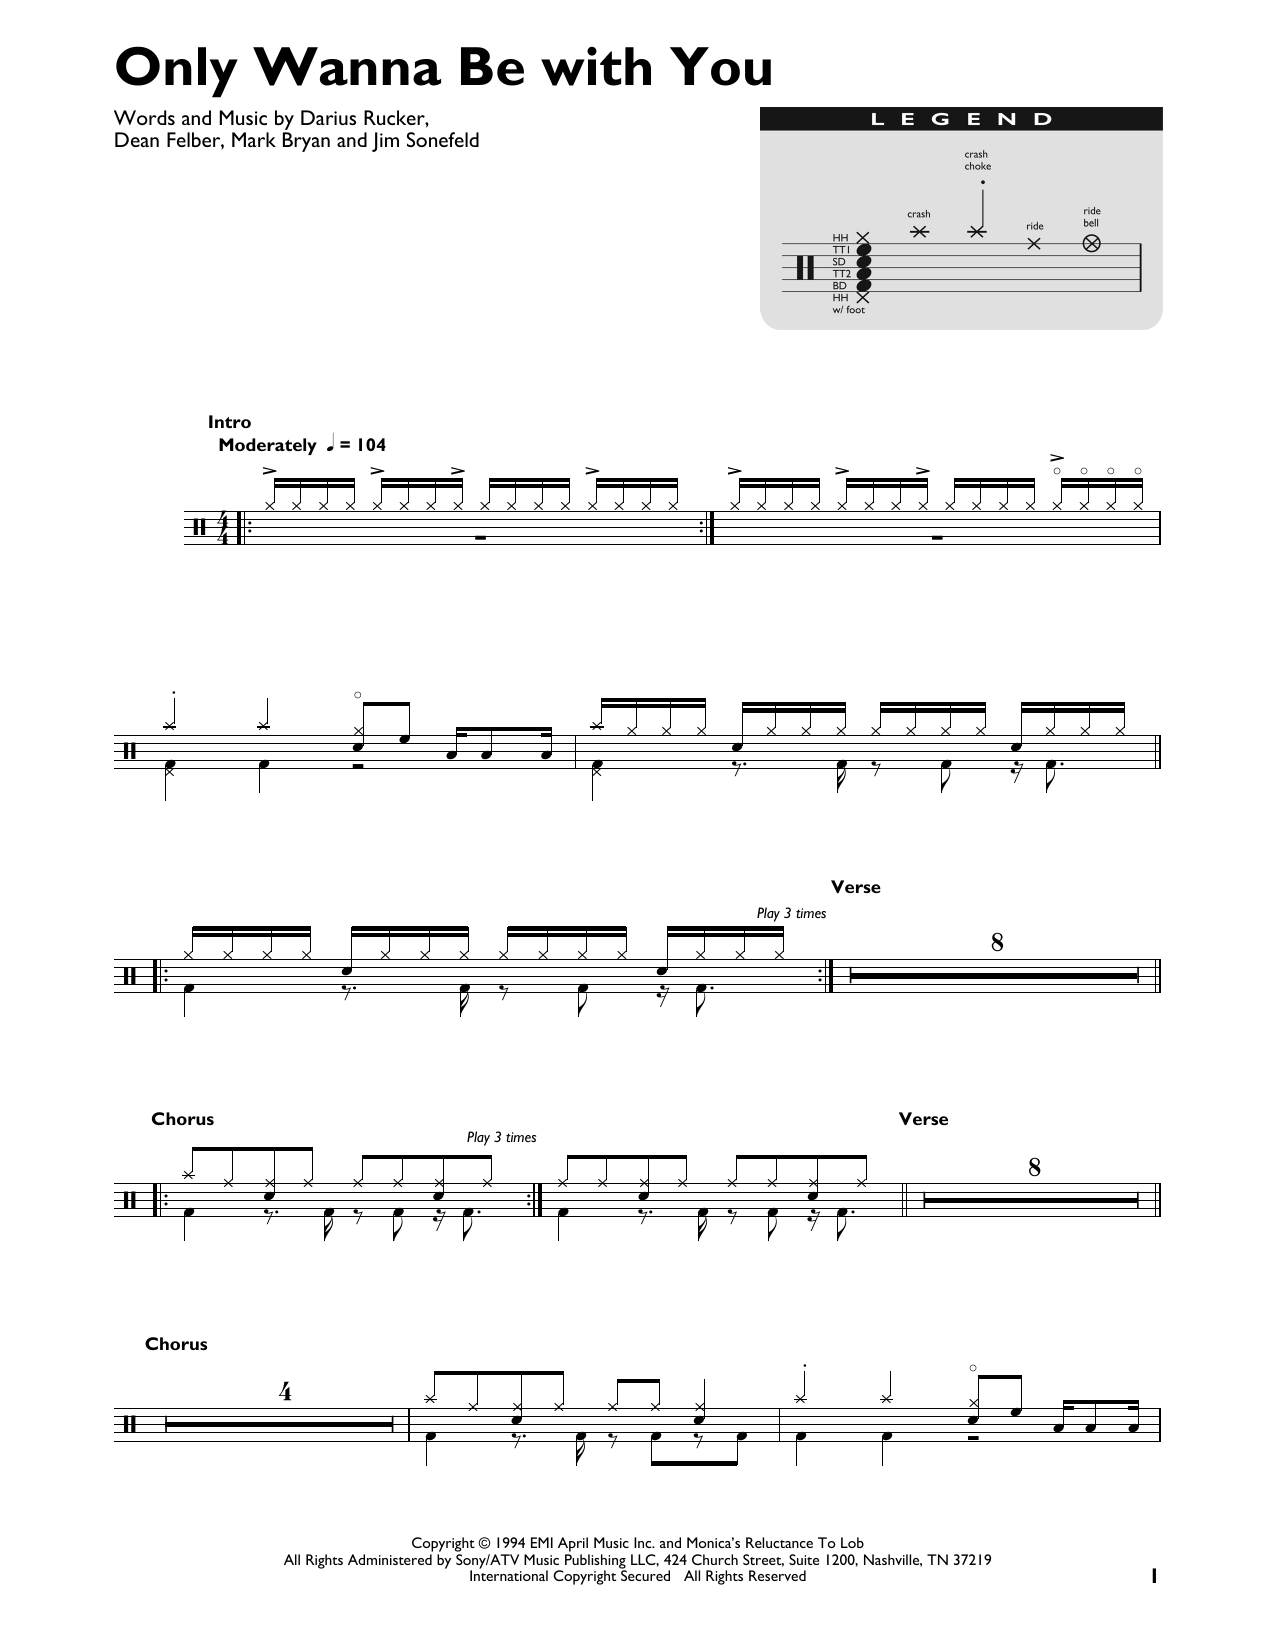 Download Hootie & The Blowfish Only Wanna Be With You Sheet Music